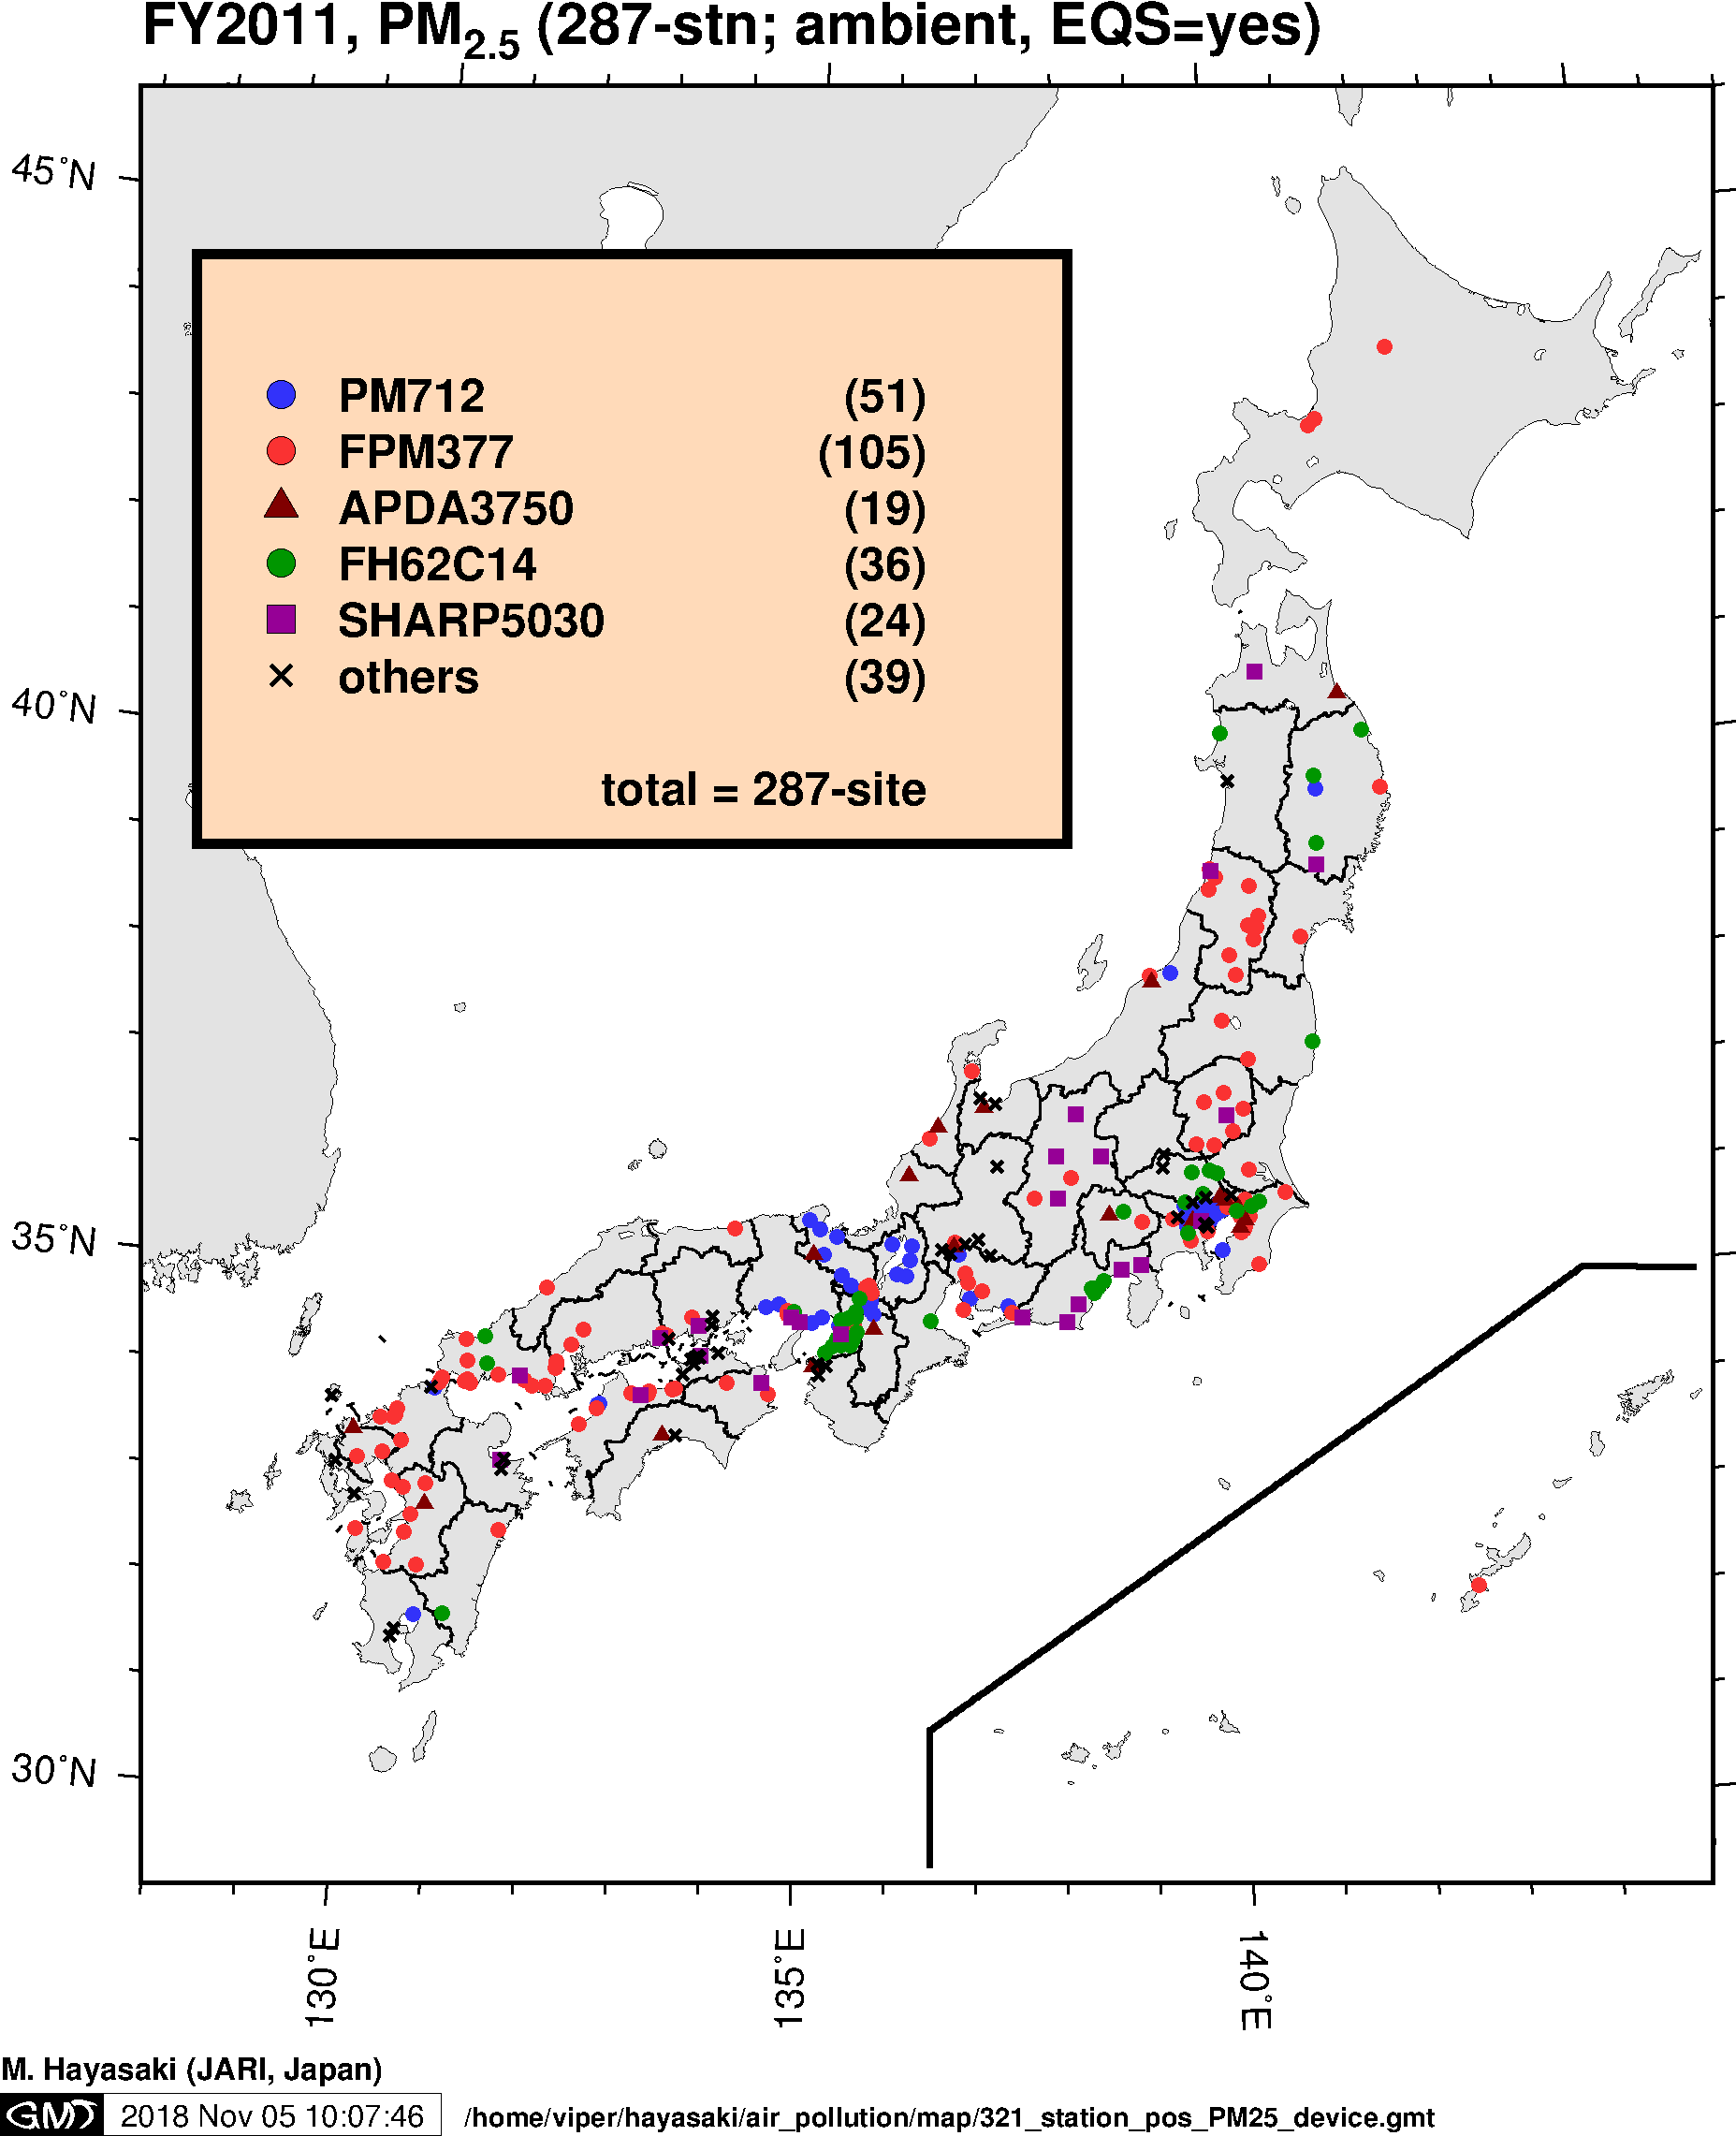 PM2.5 Monitoring devices in Japan (FY2011)